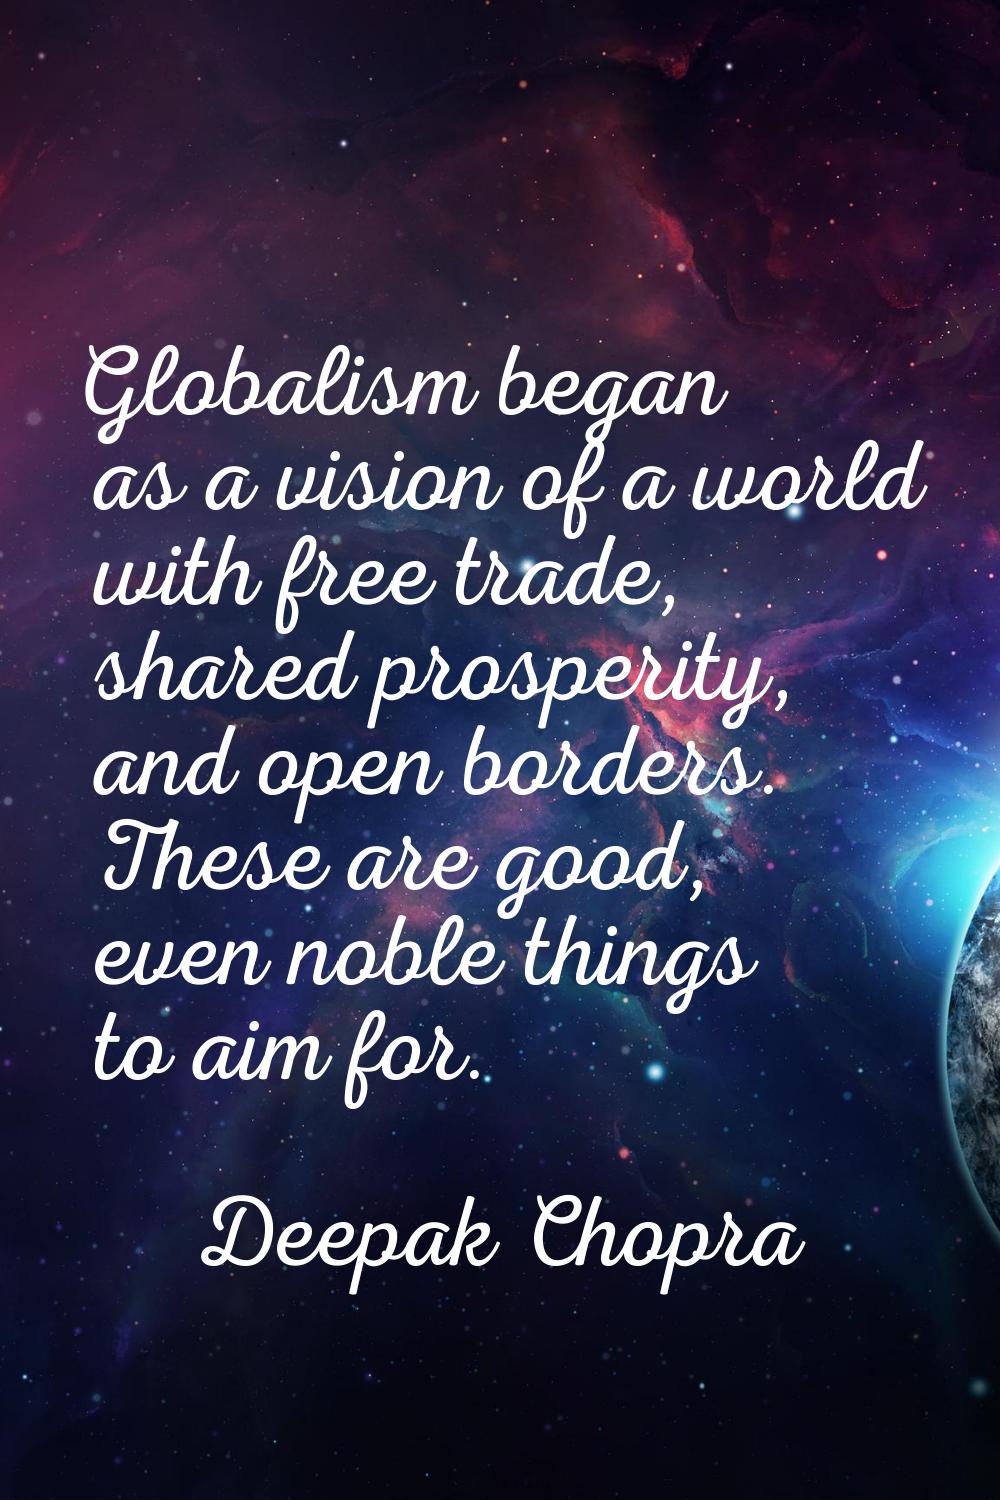 Globalism began as a vision of a world with free trade, shared prosperity, and open borders. These 